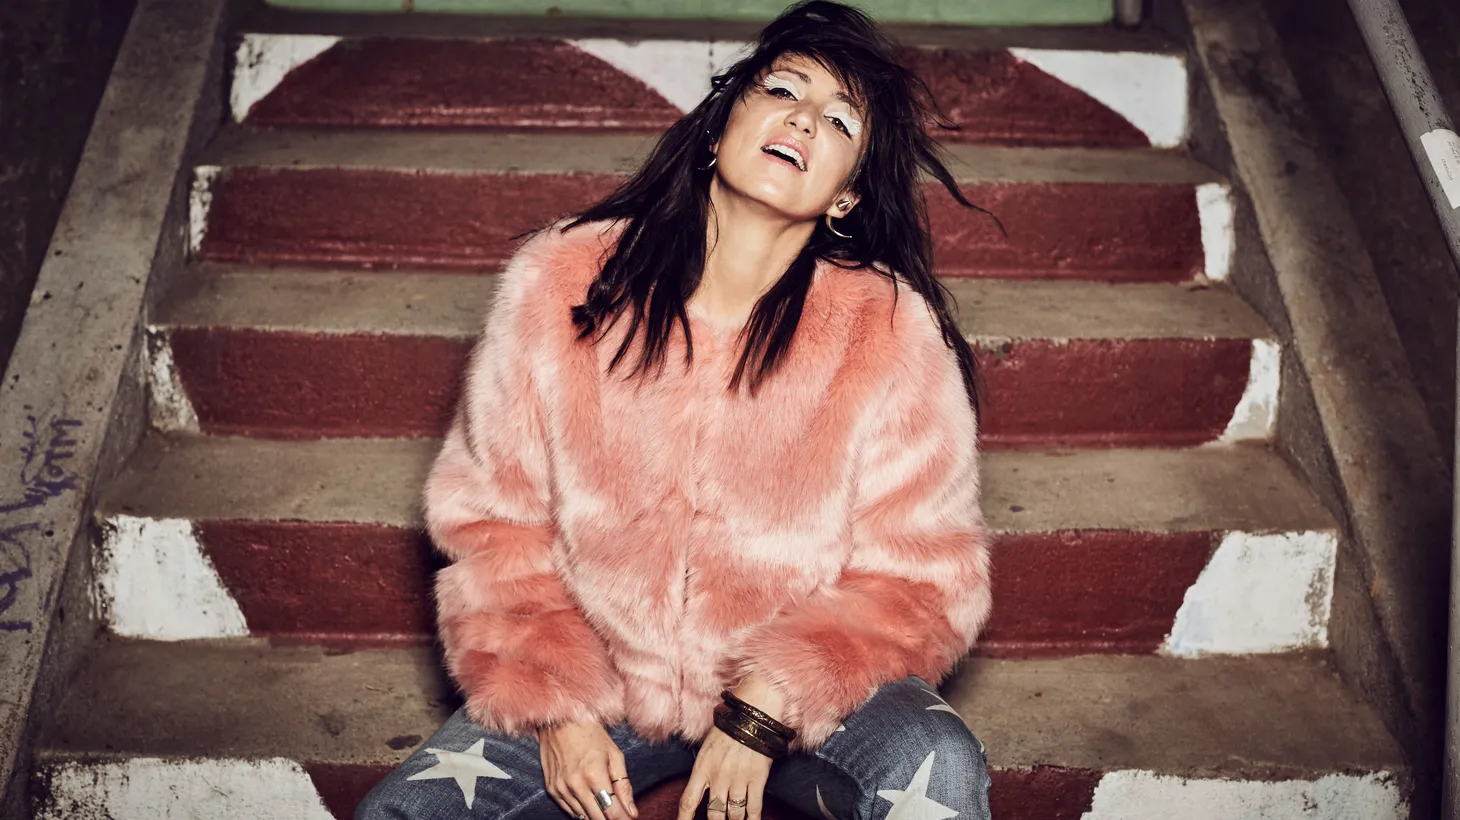 Scottish singer-songwriter KT Tunstall moved to LA and created her poppiest record yet with Kin.